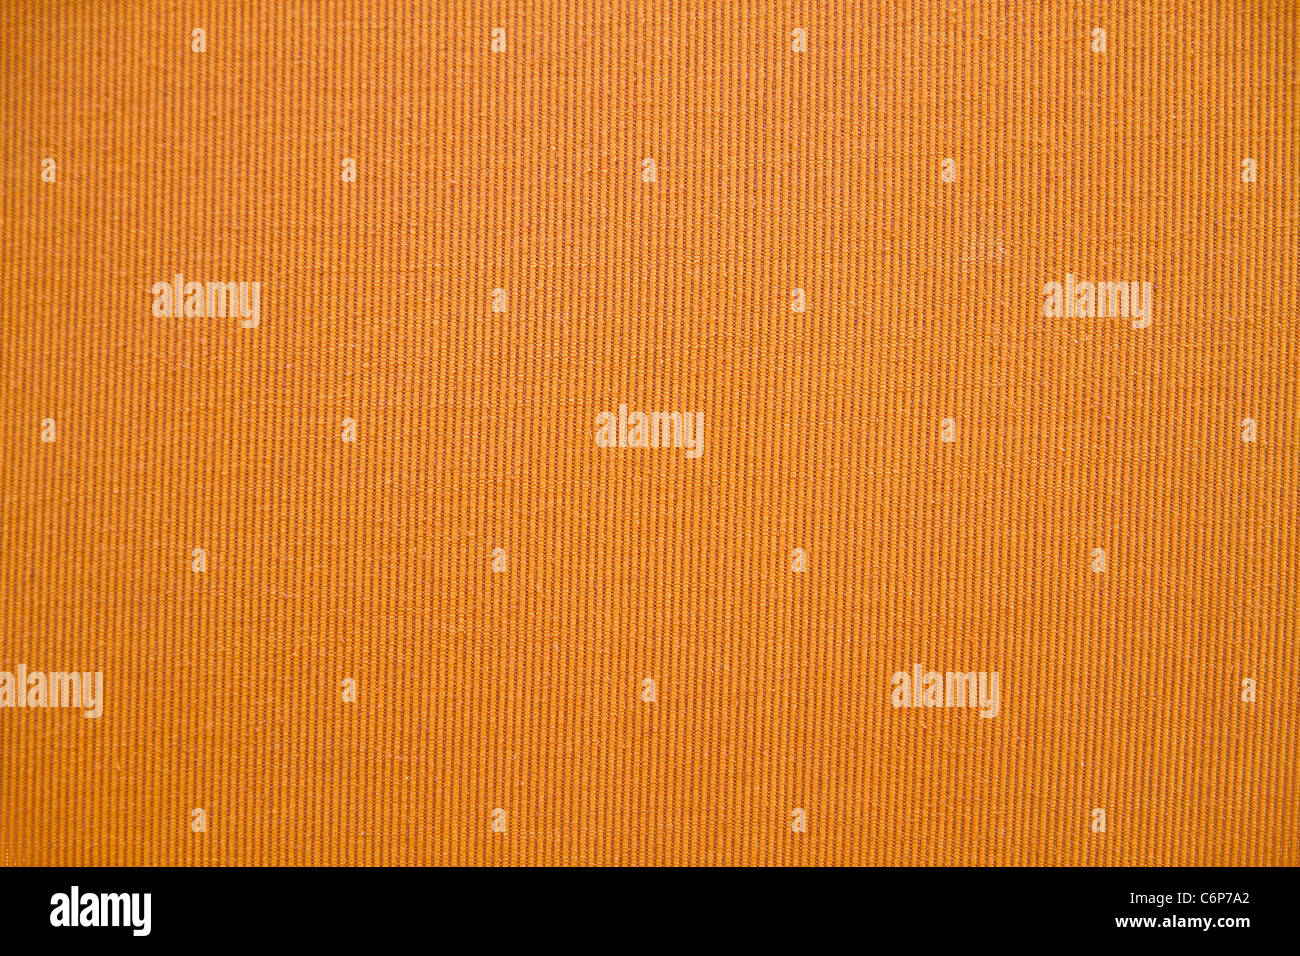 Texture of yellow fabric background Stock Photo